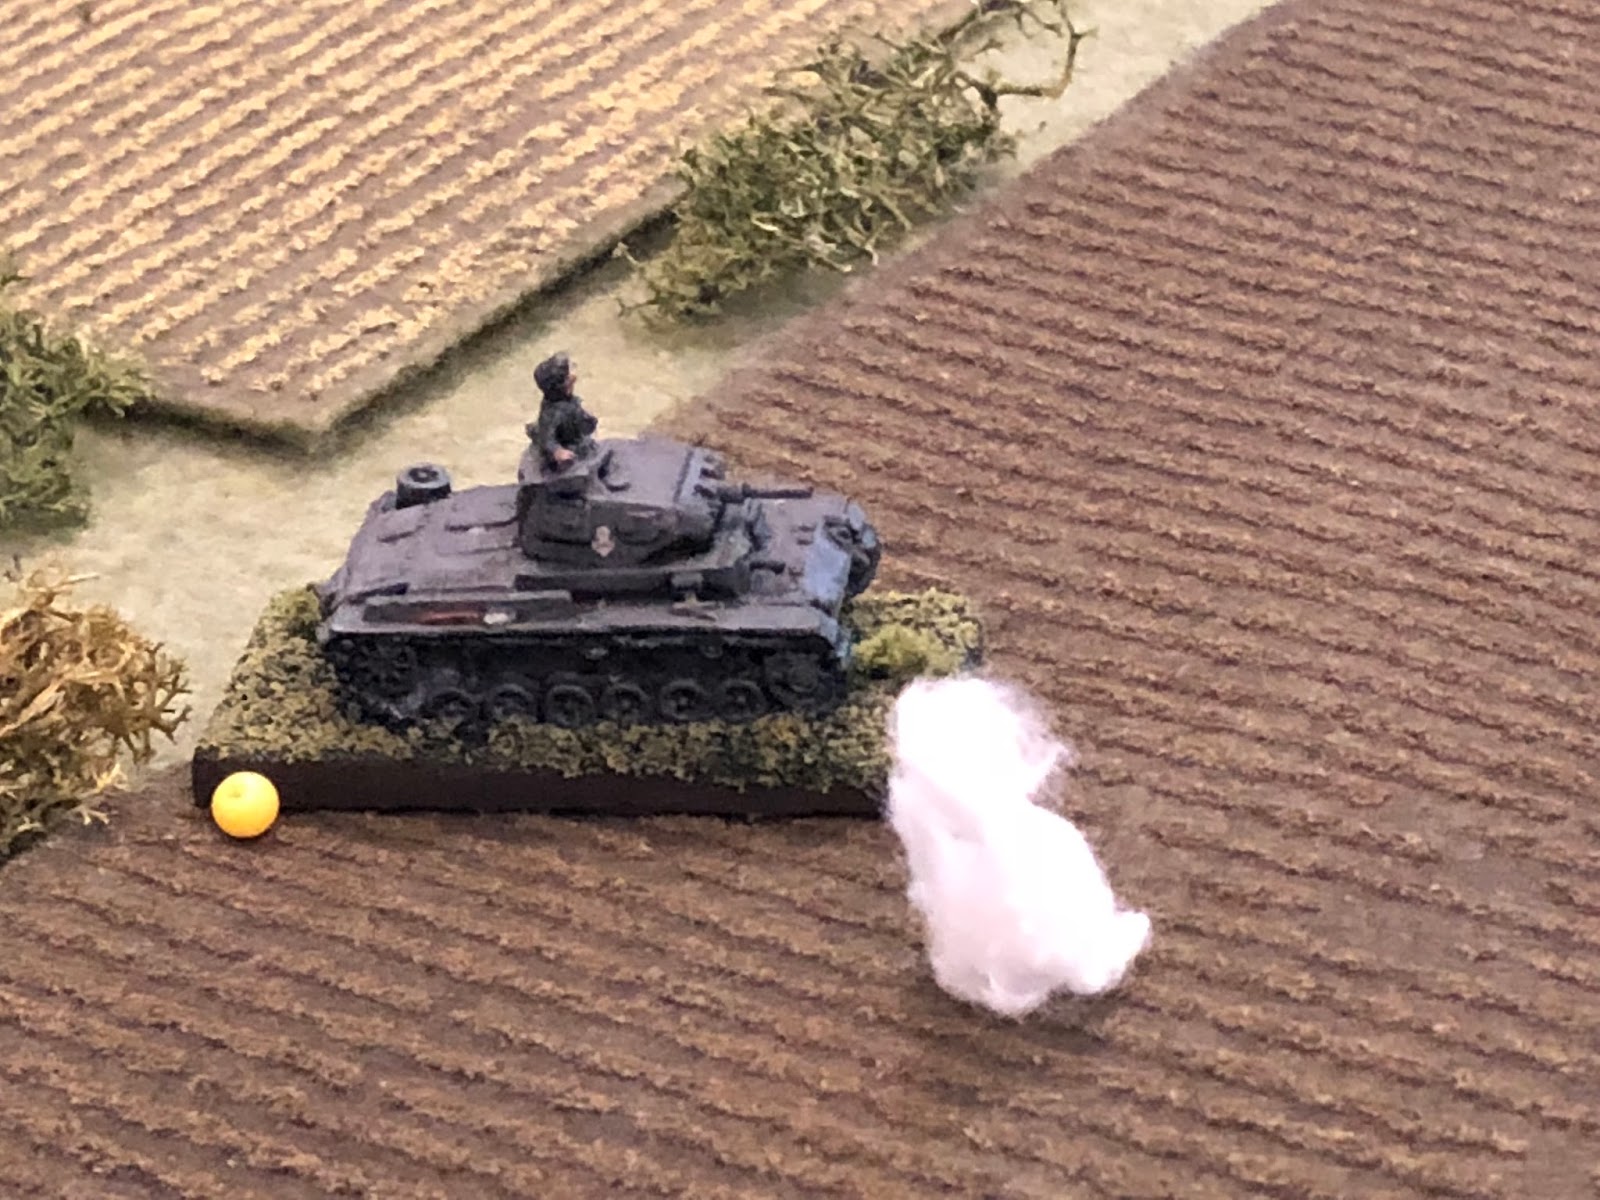  Again the German vehicle is rocked by a near miss, but they continue pushing forward. 